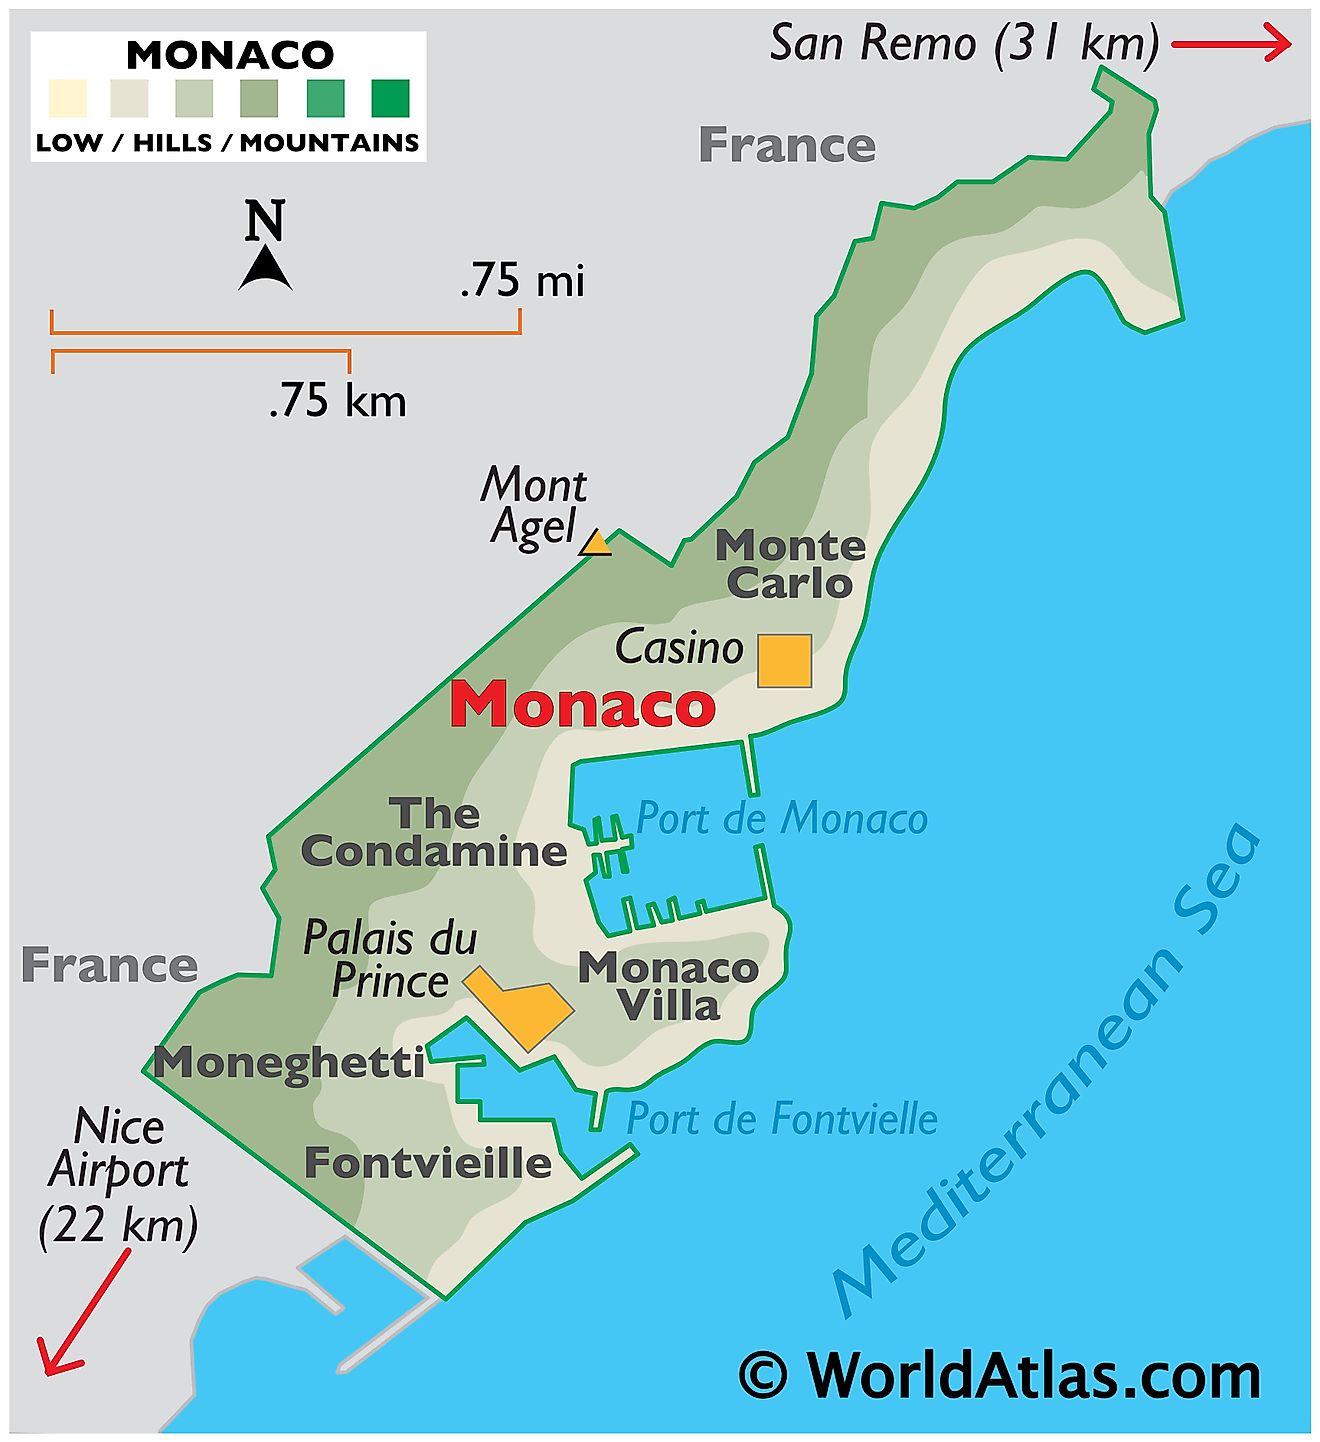 Physical Map Monaco showing relief, coast, ports, important urban centres, the highest point of Mont Agel, and the Casino.